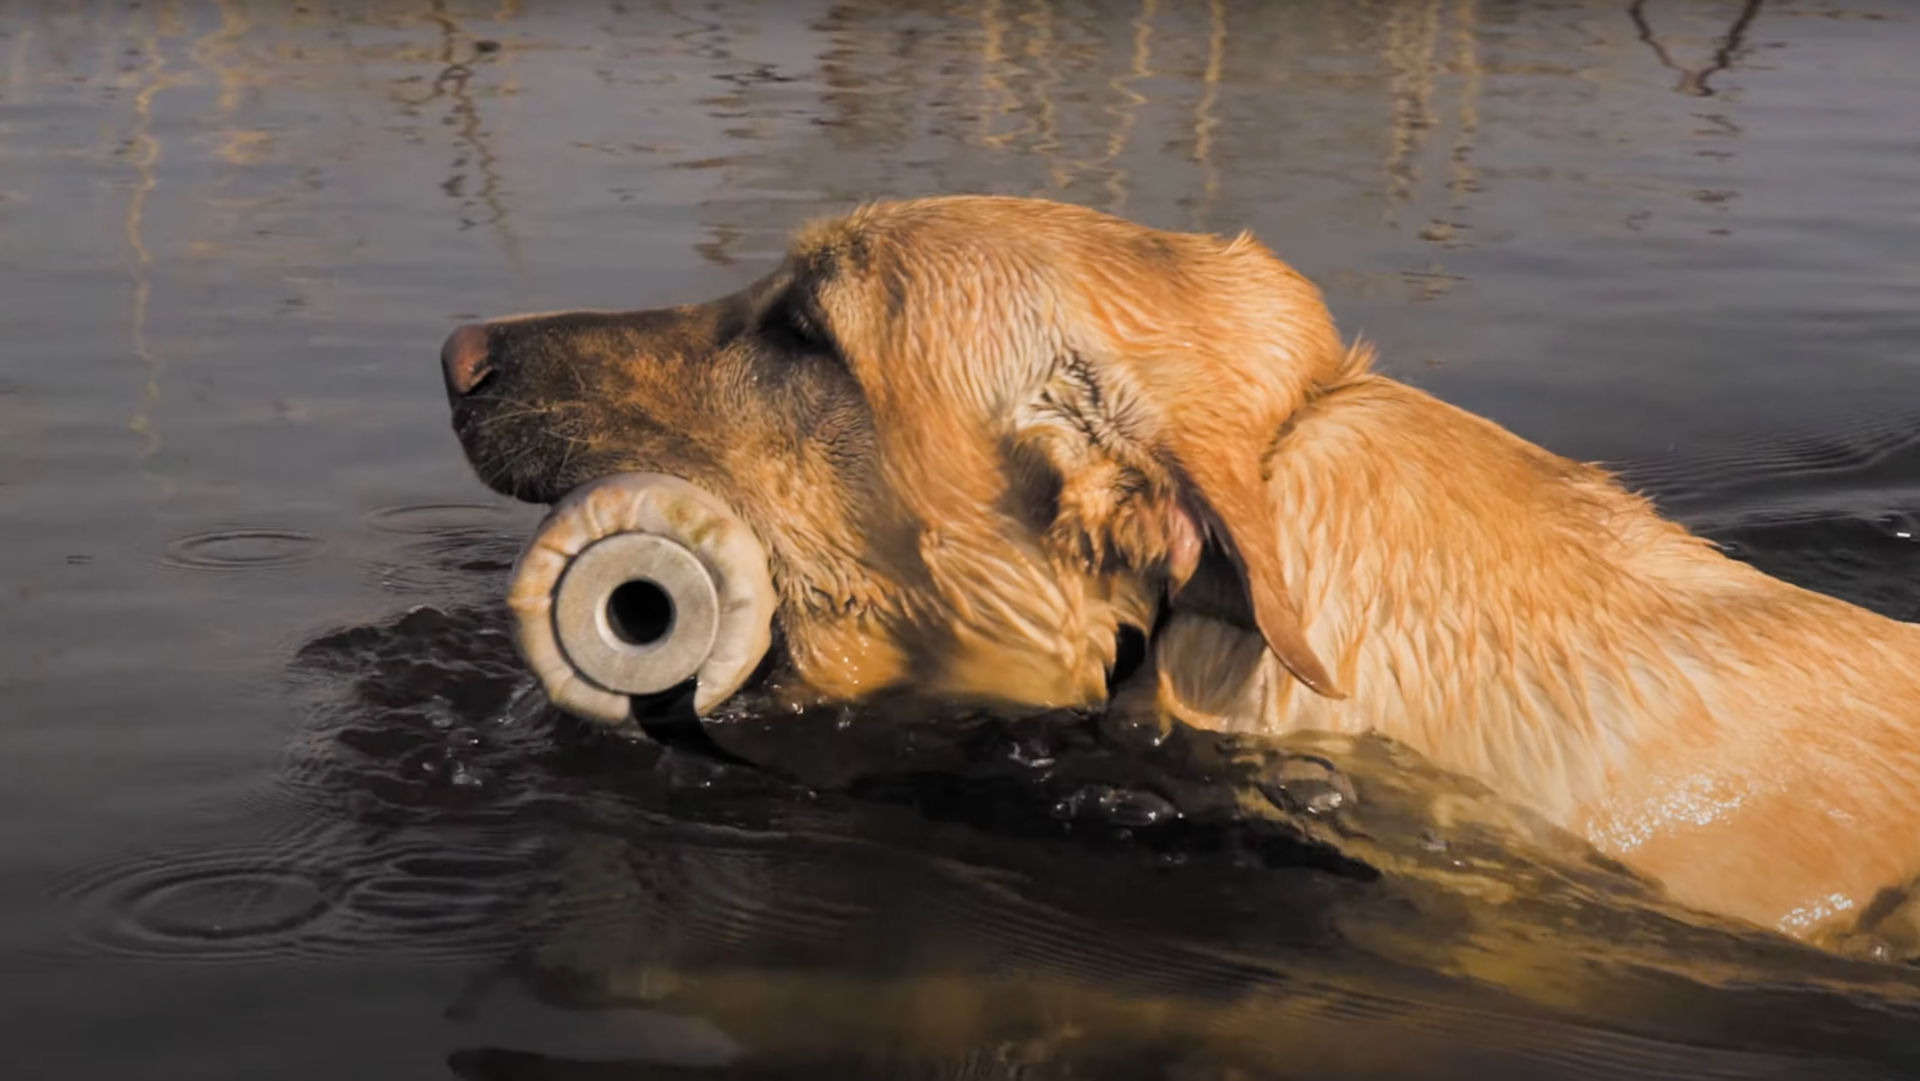 A dog swimming in water with a white training toy in its mouth